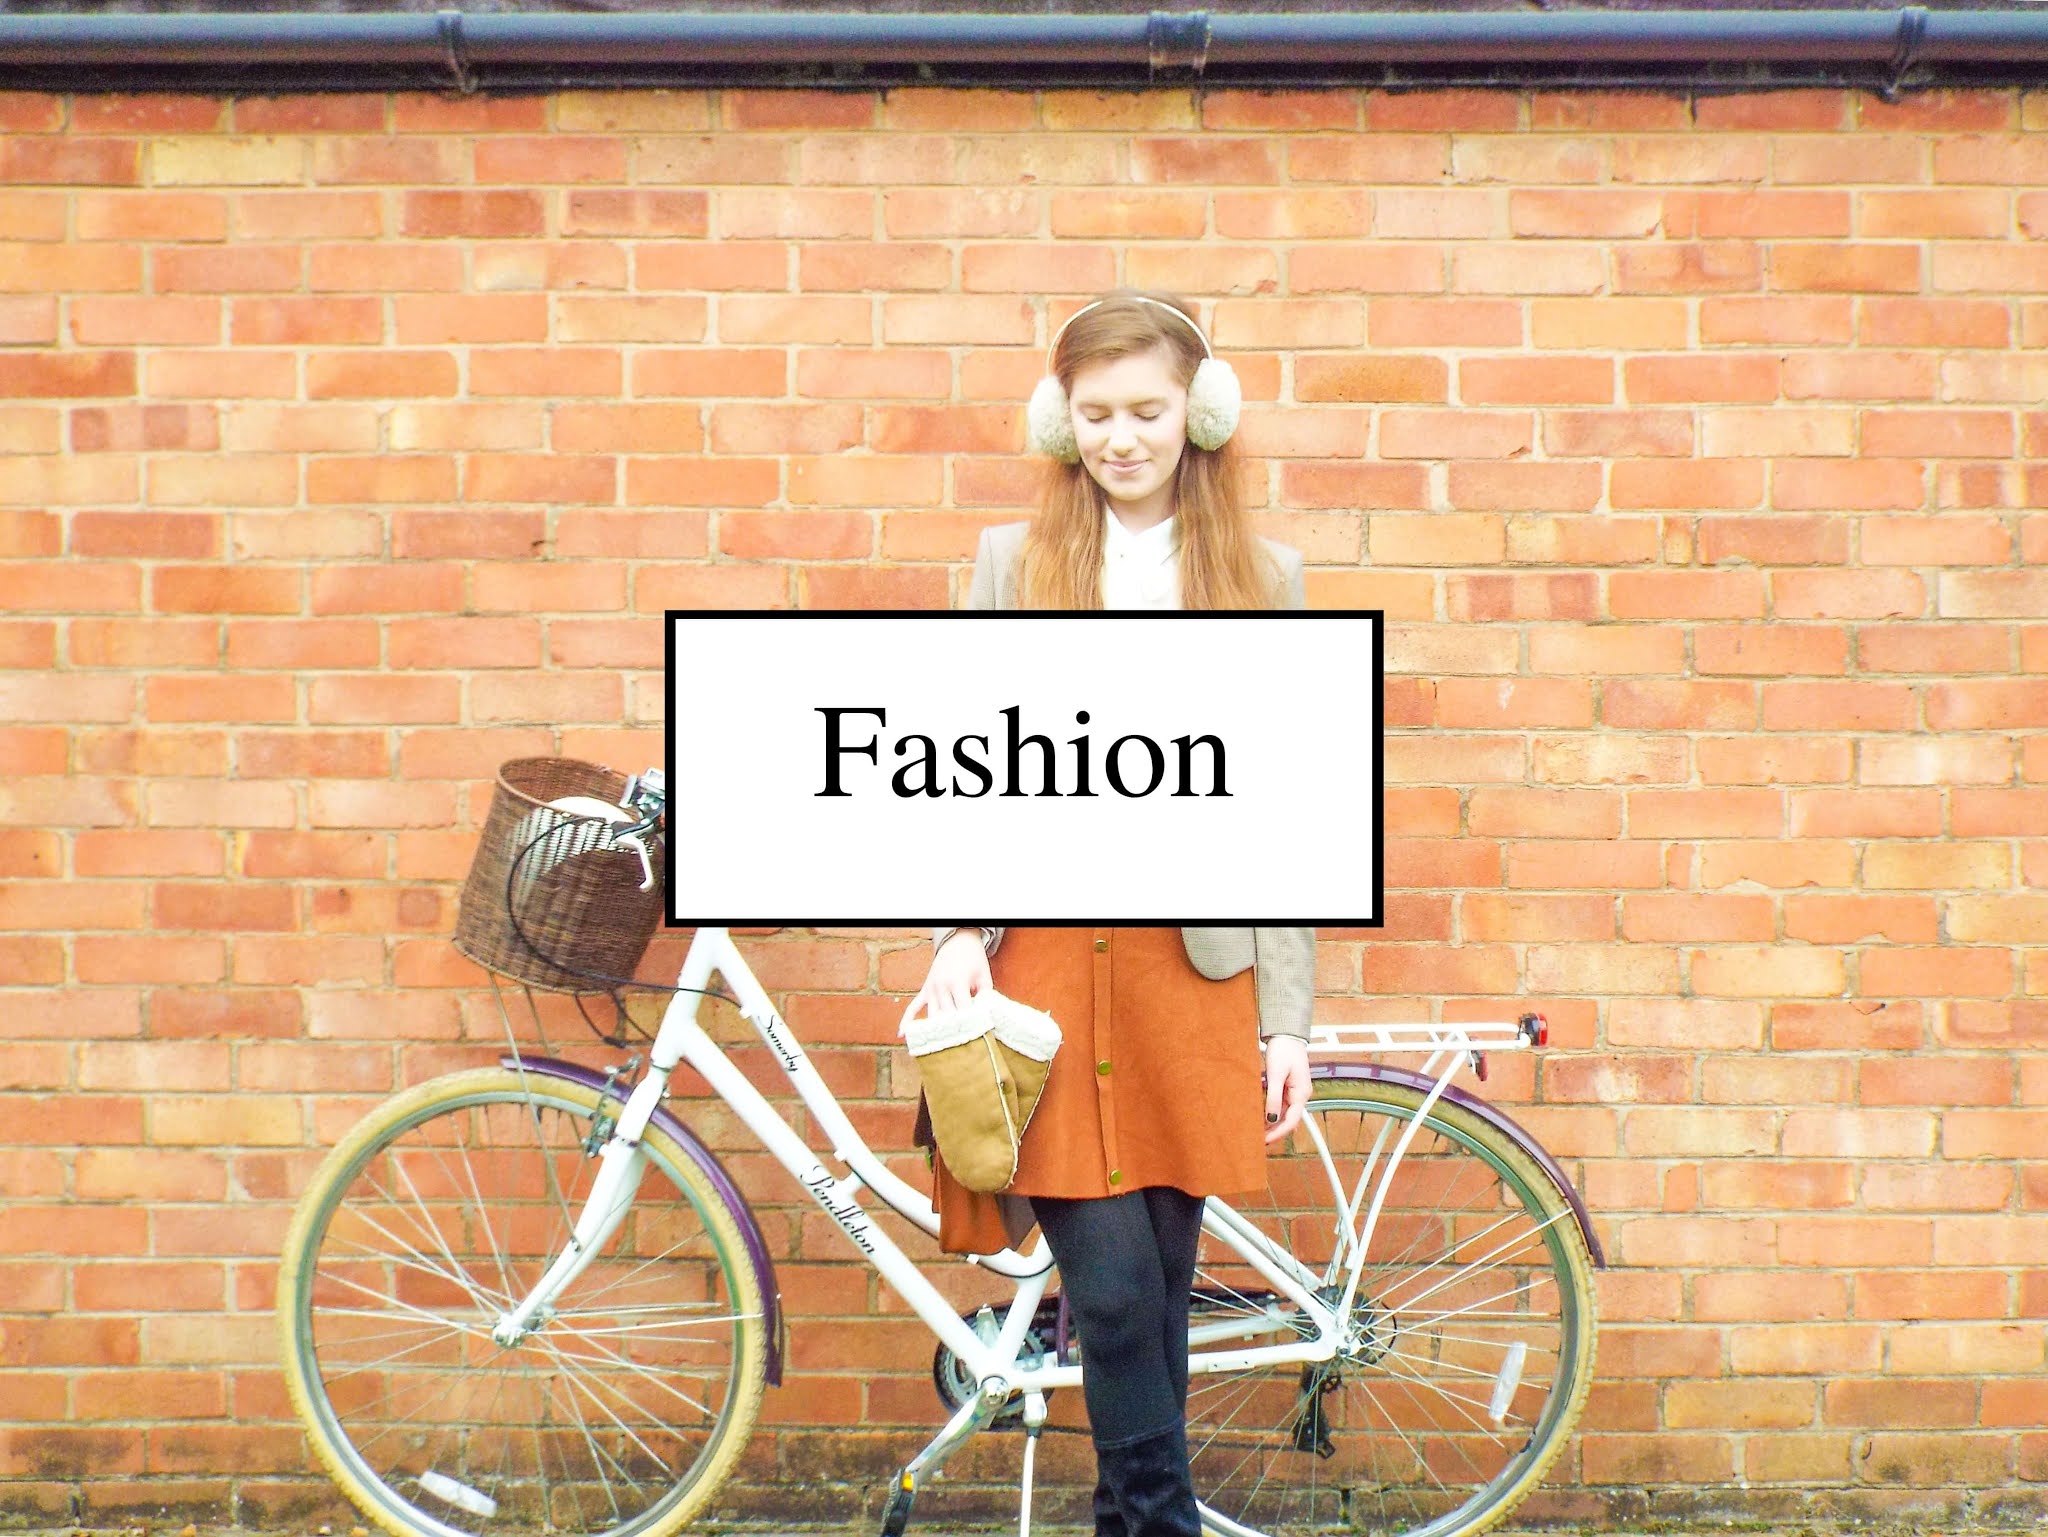 Ellie, stood with her Victoria Pendleton bike against brick wall. Wearing tweed blazer, brown skirt, white shirt, black tights, high leg boots, fluffy ear muffs and mittens.